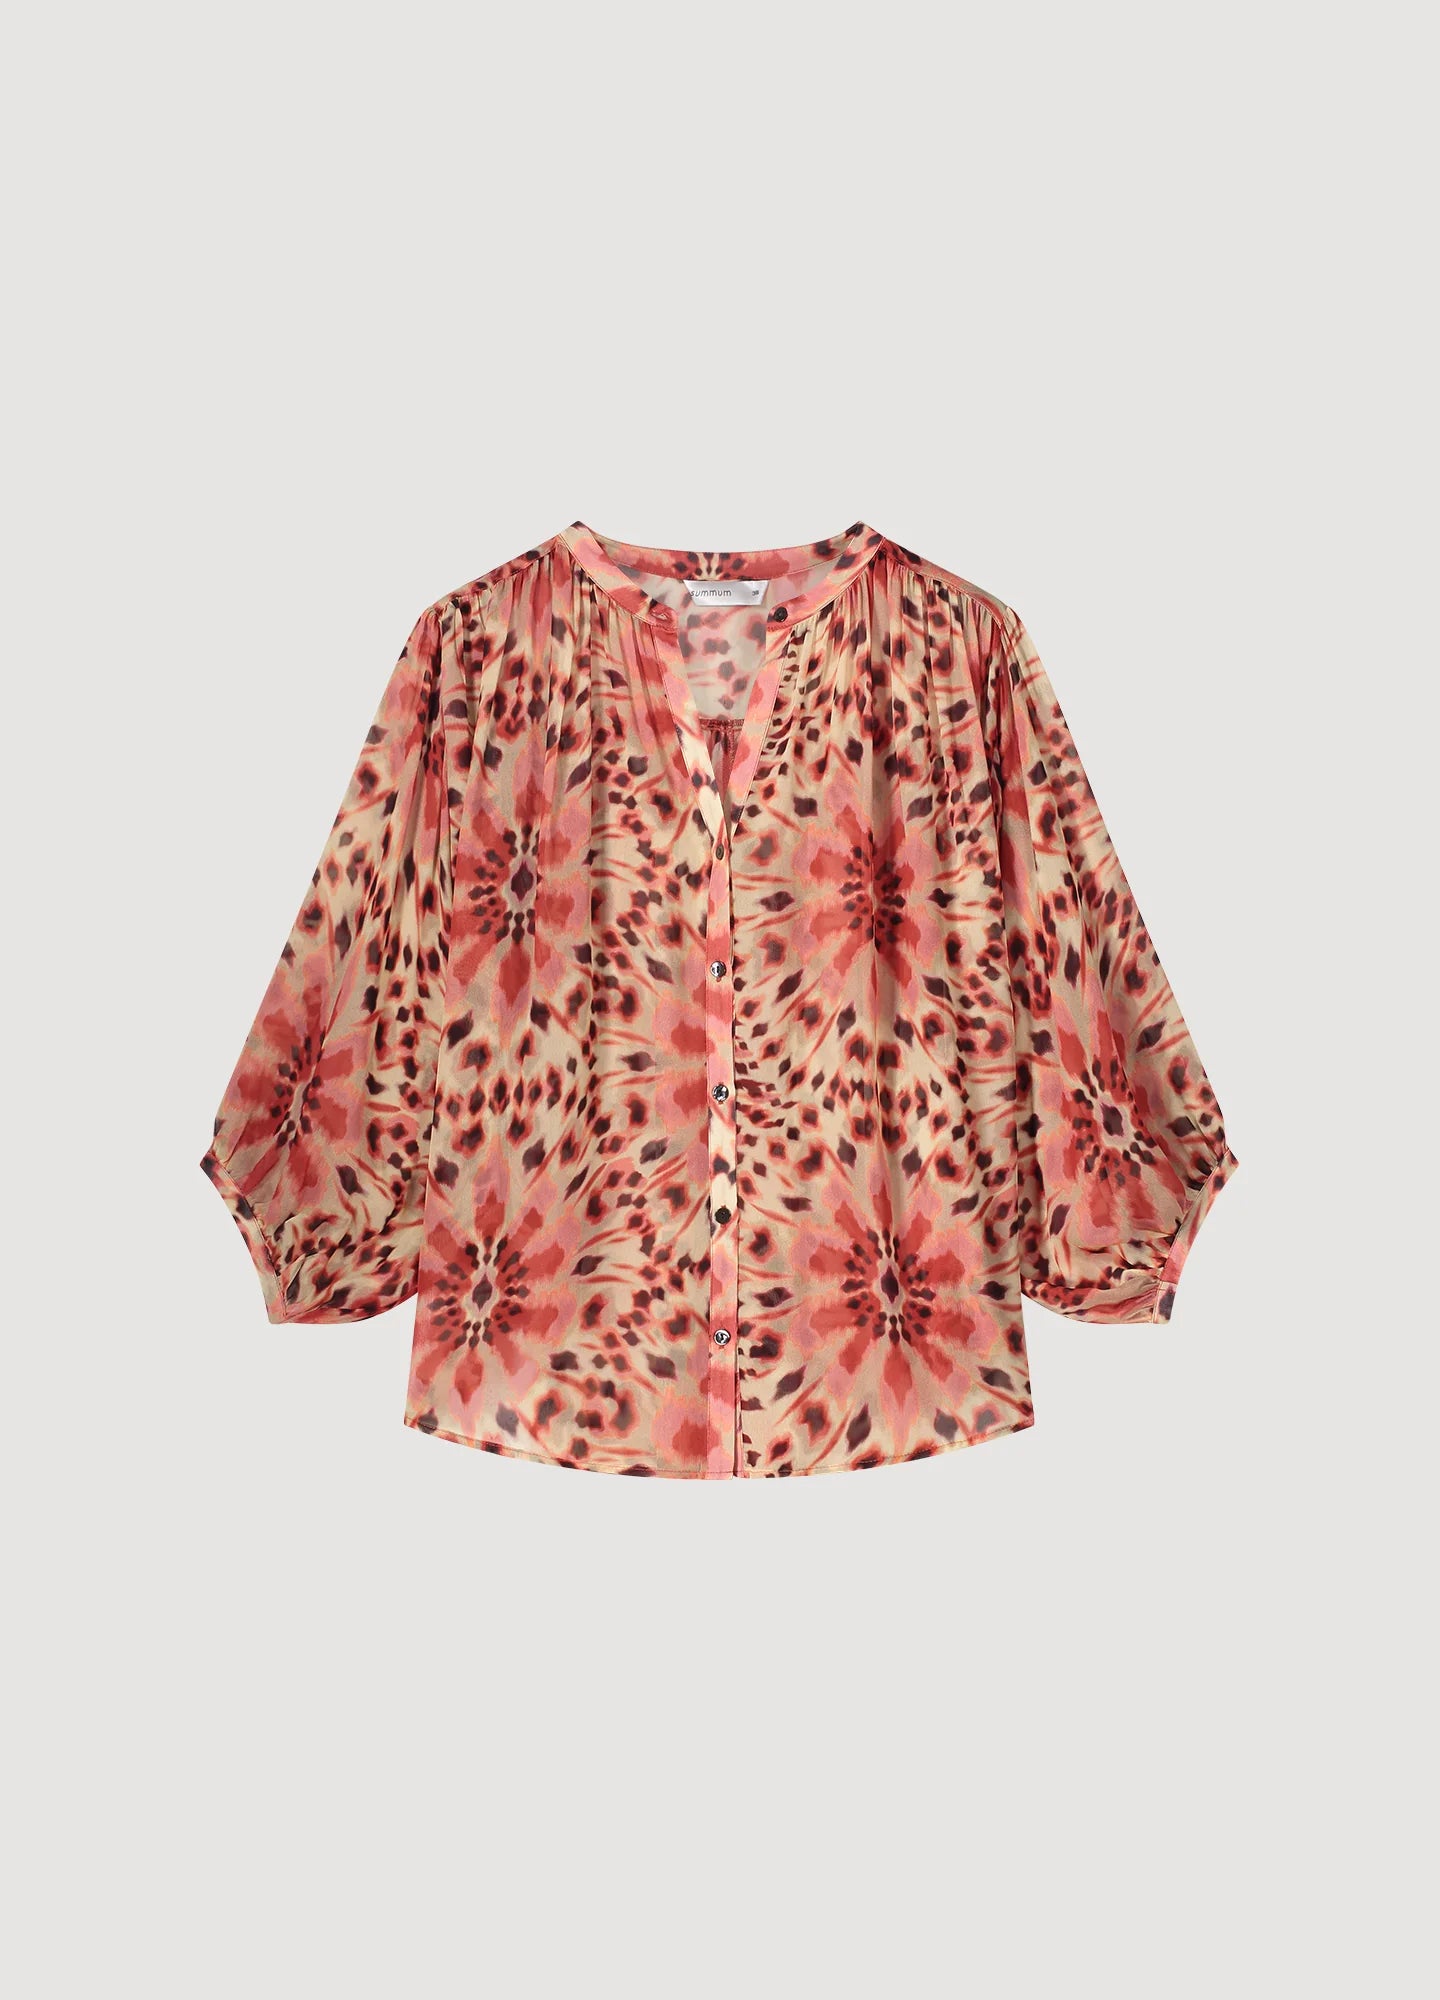 Flared Tie-Dye Flower Blouse by Summum in Bright Coral